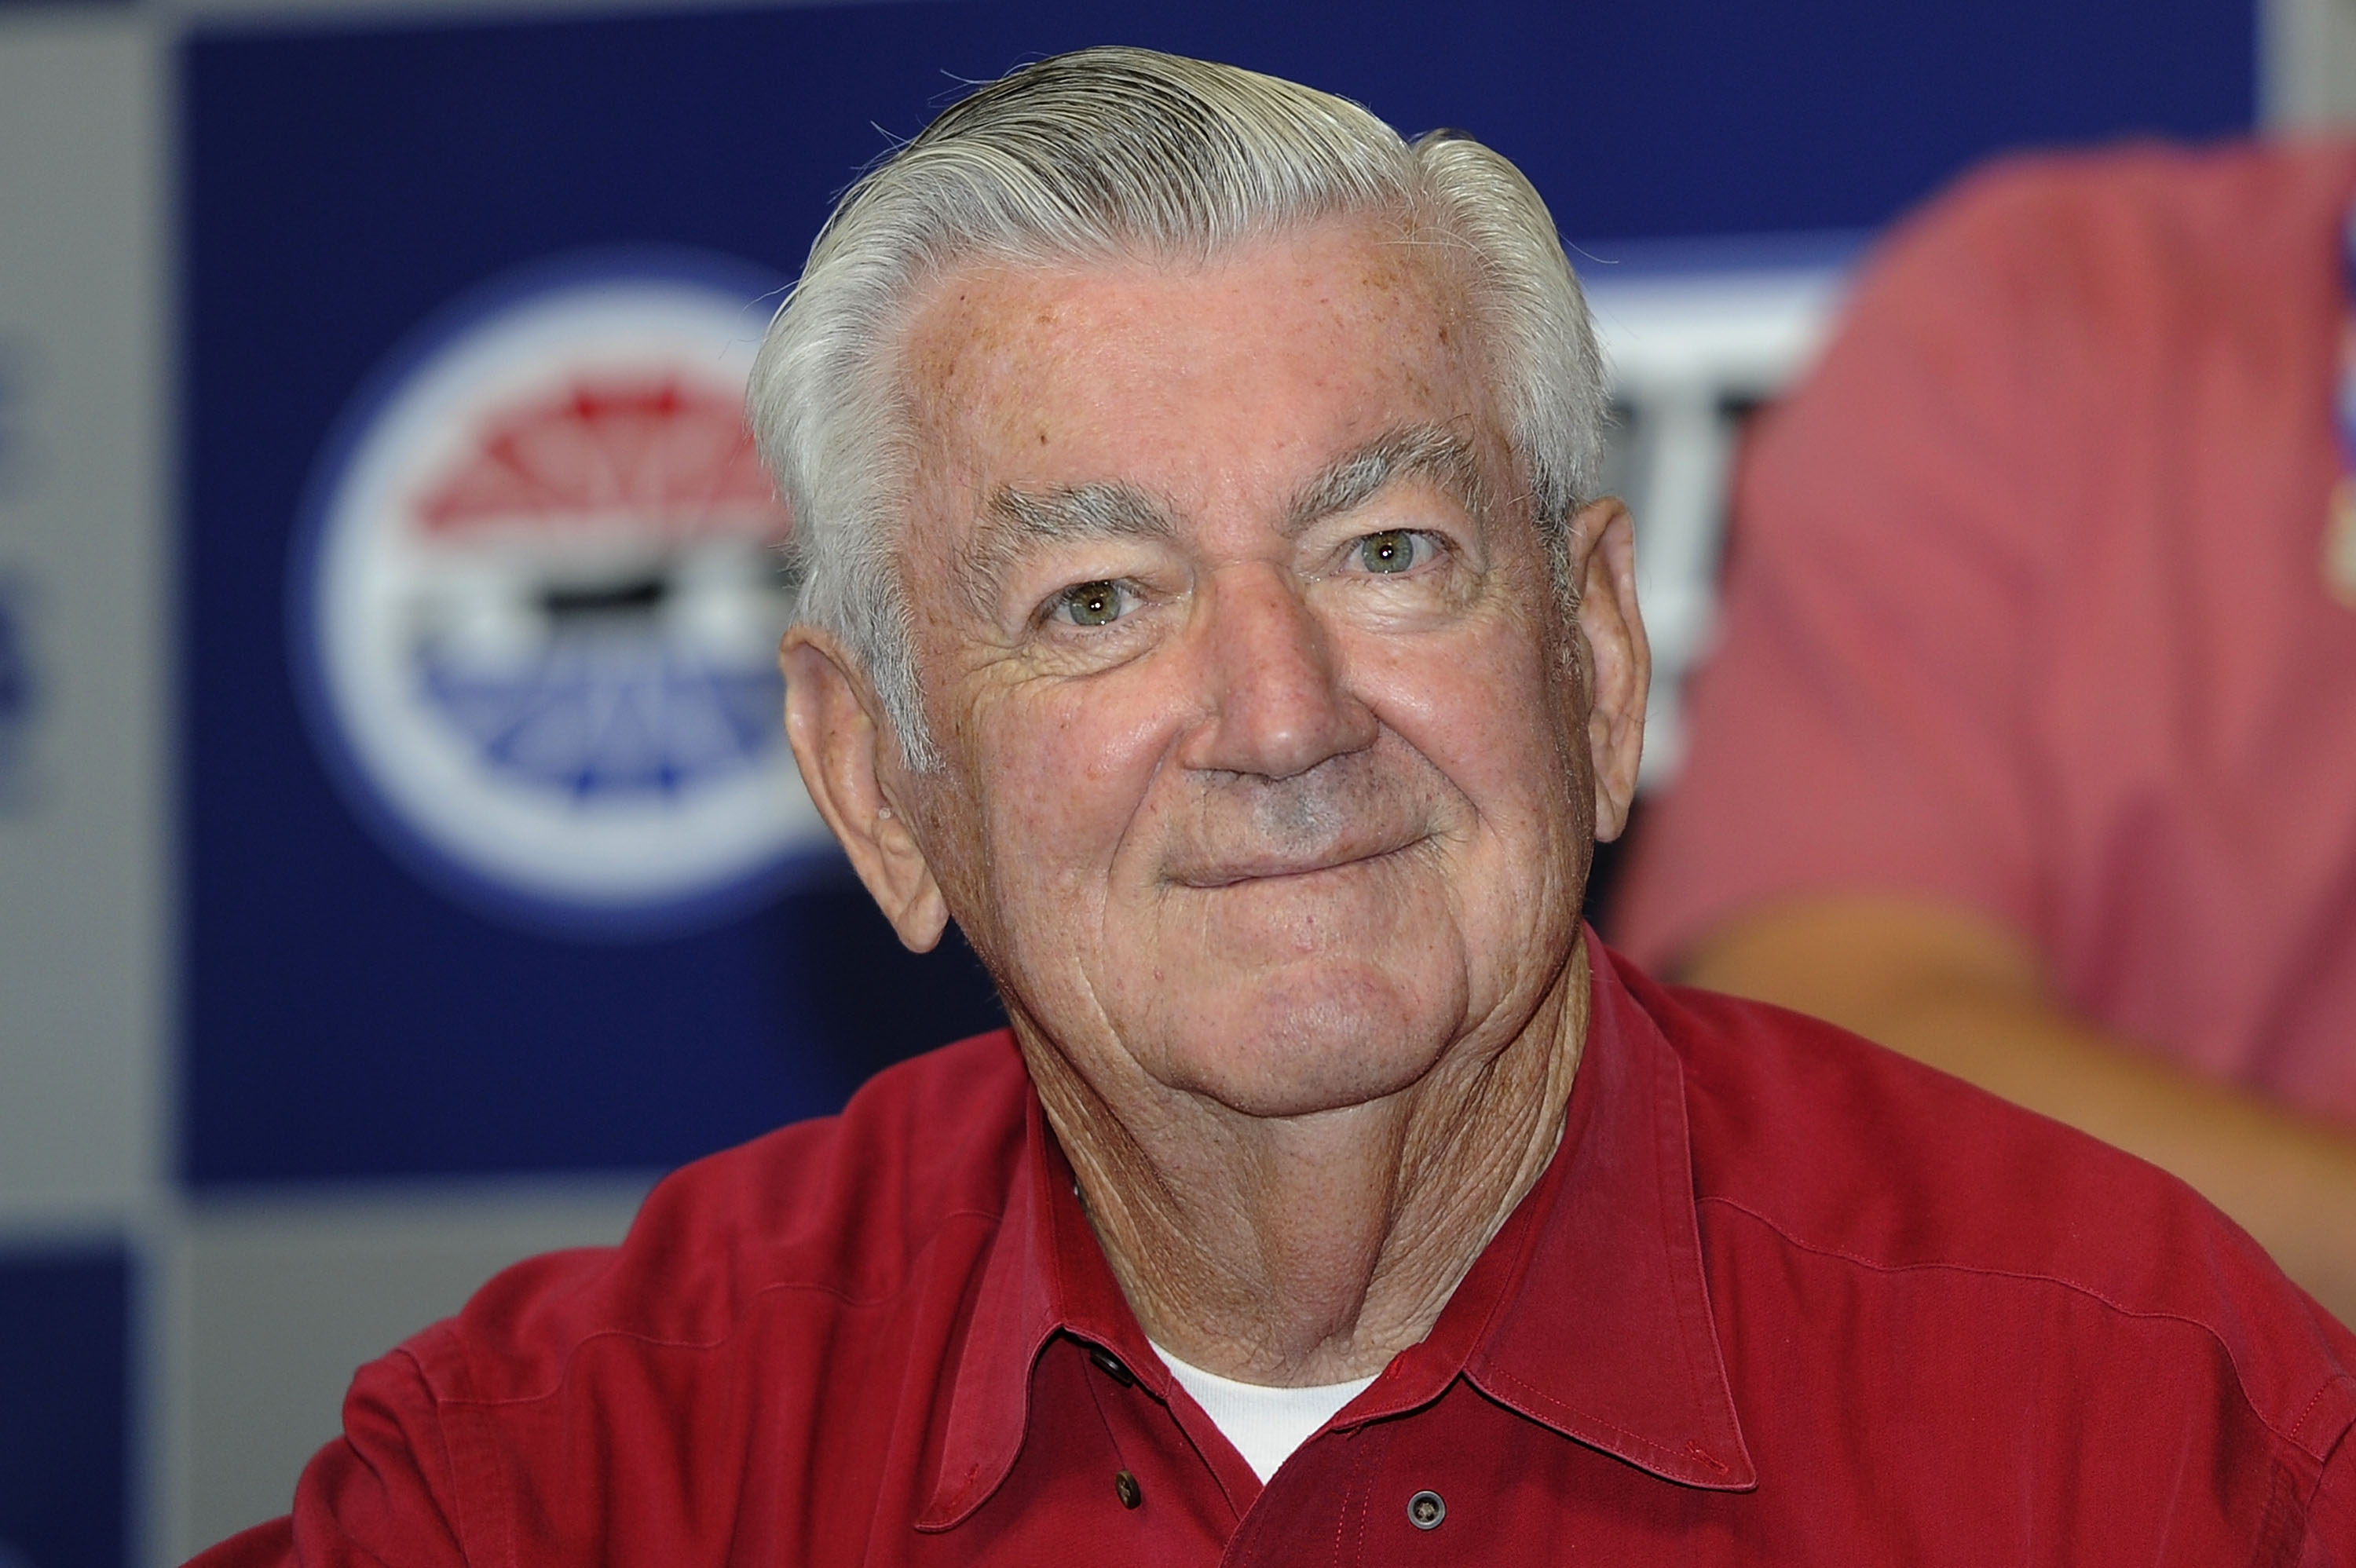 CONCORD, NC - OCTOBER 16:  NASCAR Past Champion, Bobby Allison speaks to the media prior to the NASCAR Sprint Cup Series Bank of America 500 at Charlotte Motor Speedway on October 16, 2010 in Concord, North Carolina.  (Photo by John Harrelson/Getty Images